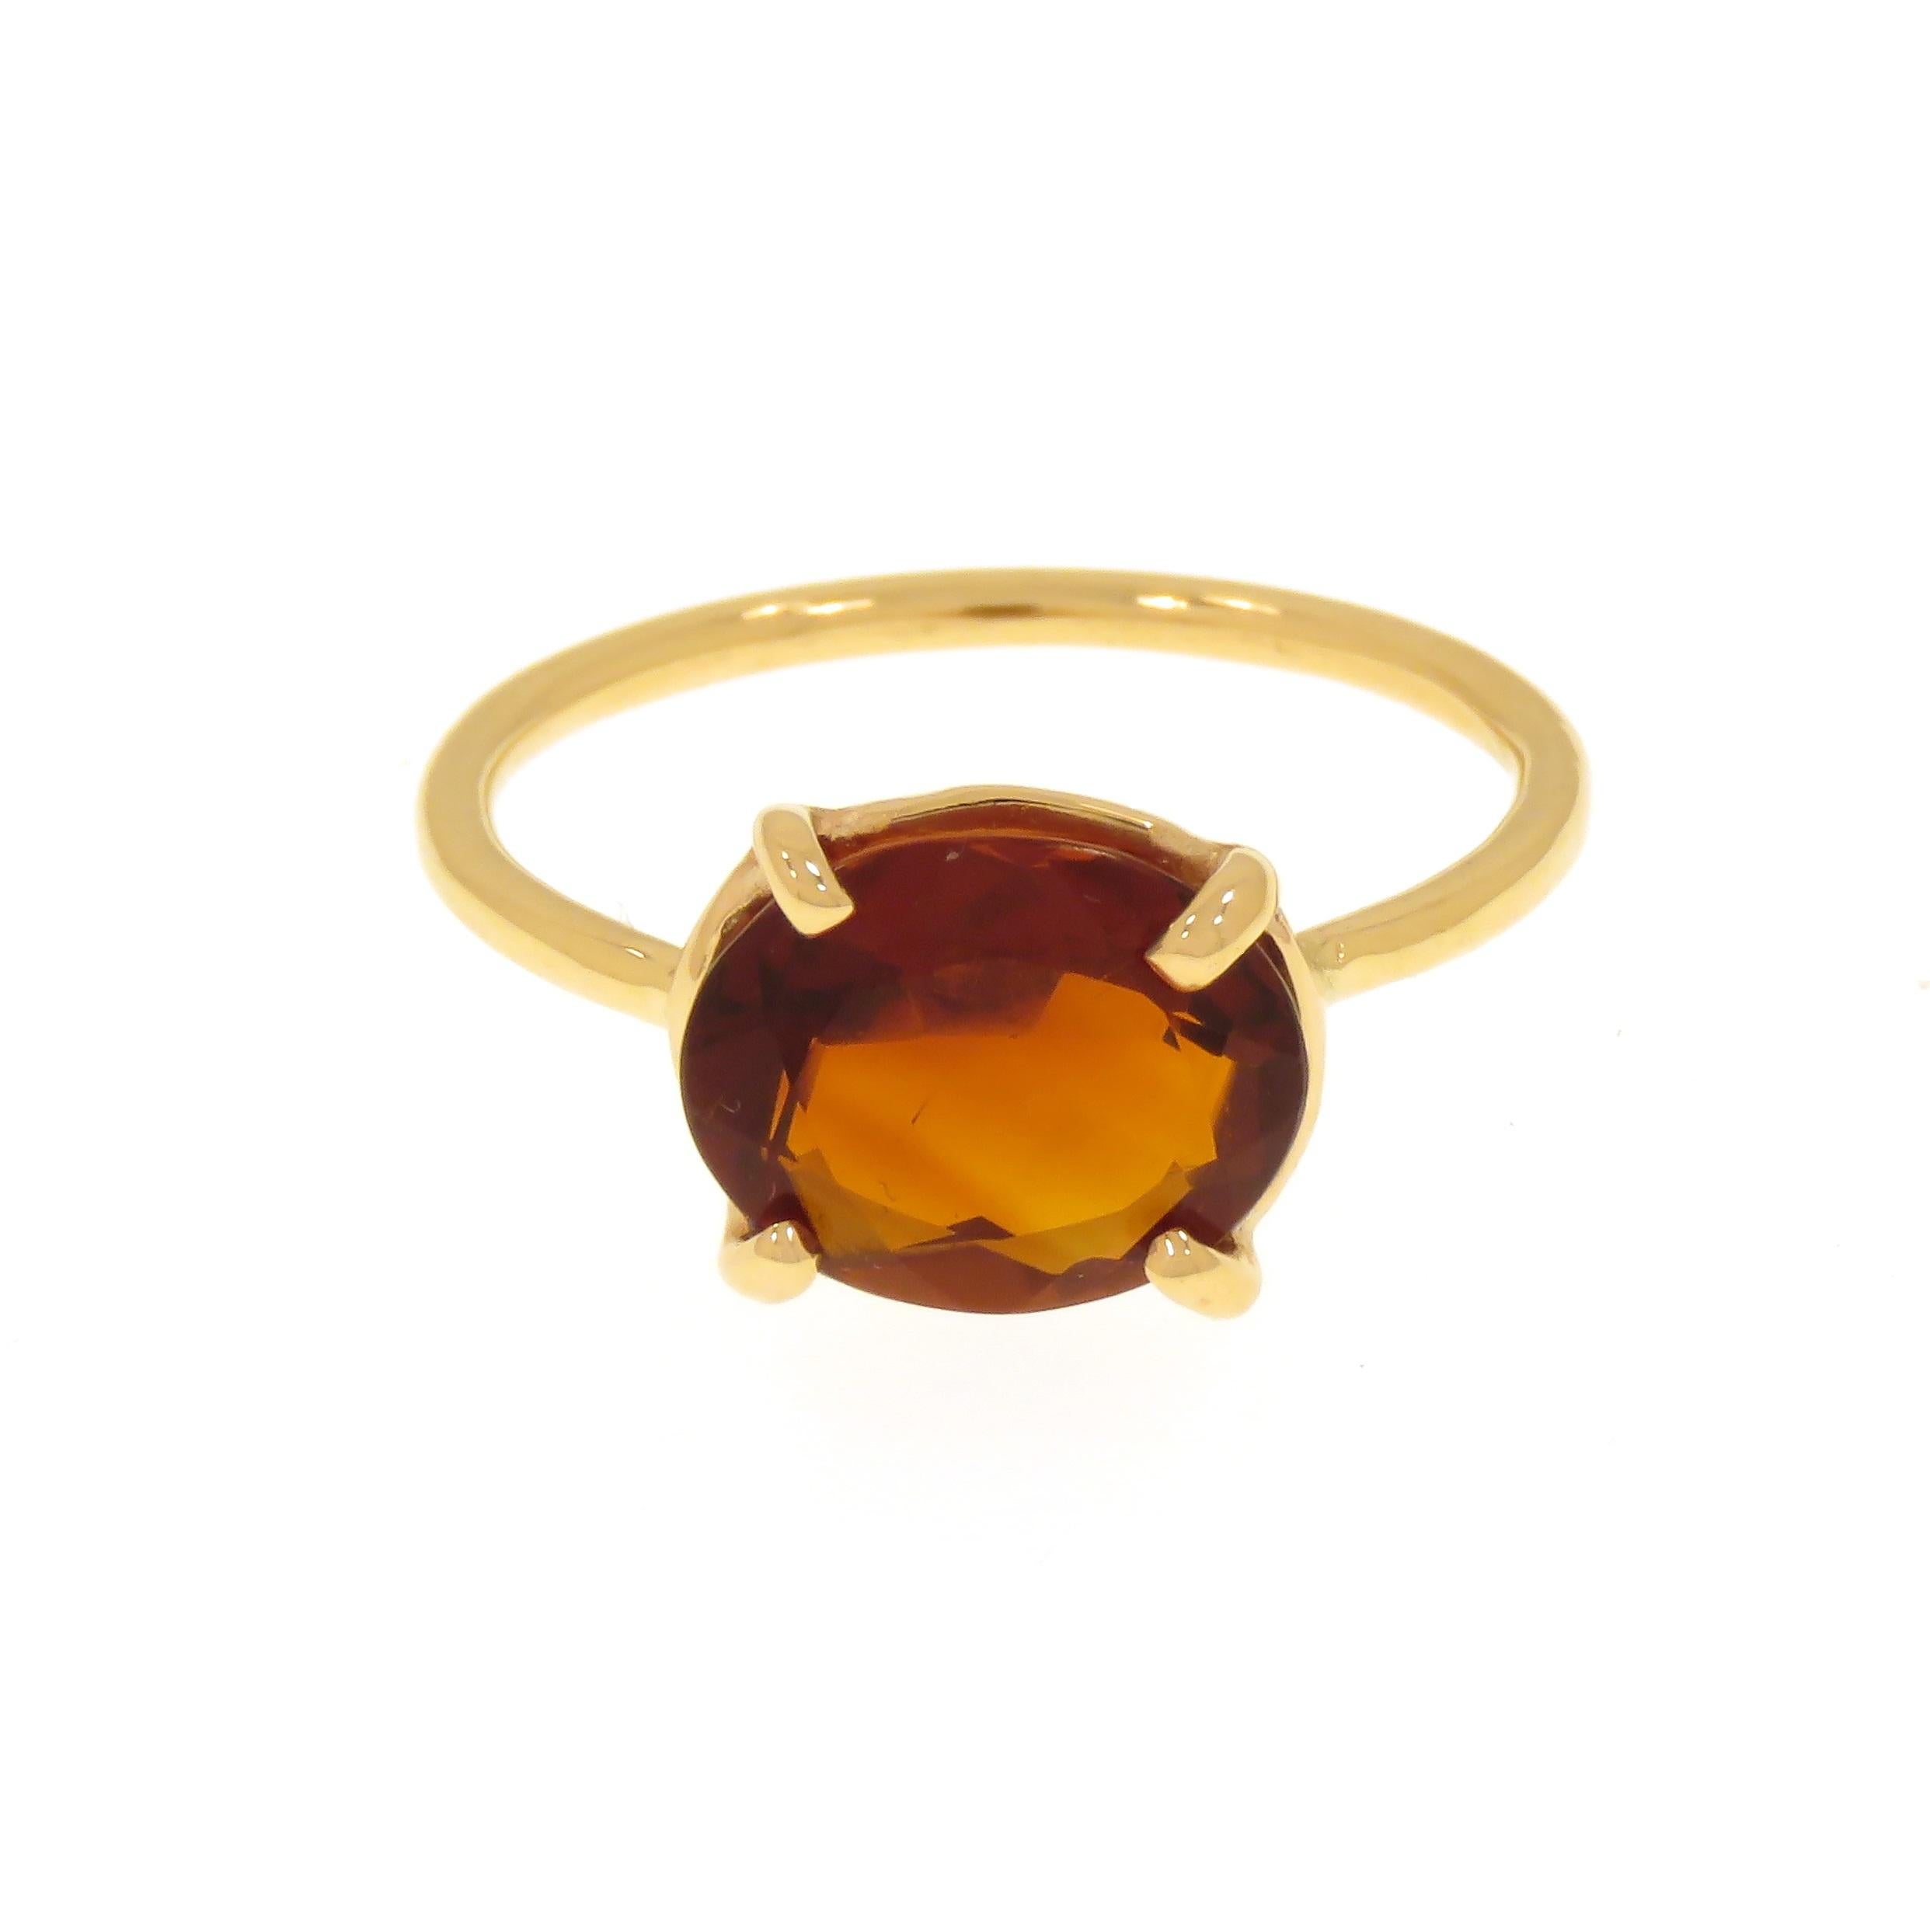 Sophisticated ring handcrafted in 9k rose gold featuring an oval cut natural garnet. The dimension of the gemstone is  10x8 millimeters /  0.393x0.314 inches. Us finger size is 6.5 / Italian size  13 / French size 53. Adjustable to the customer's